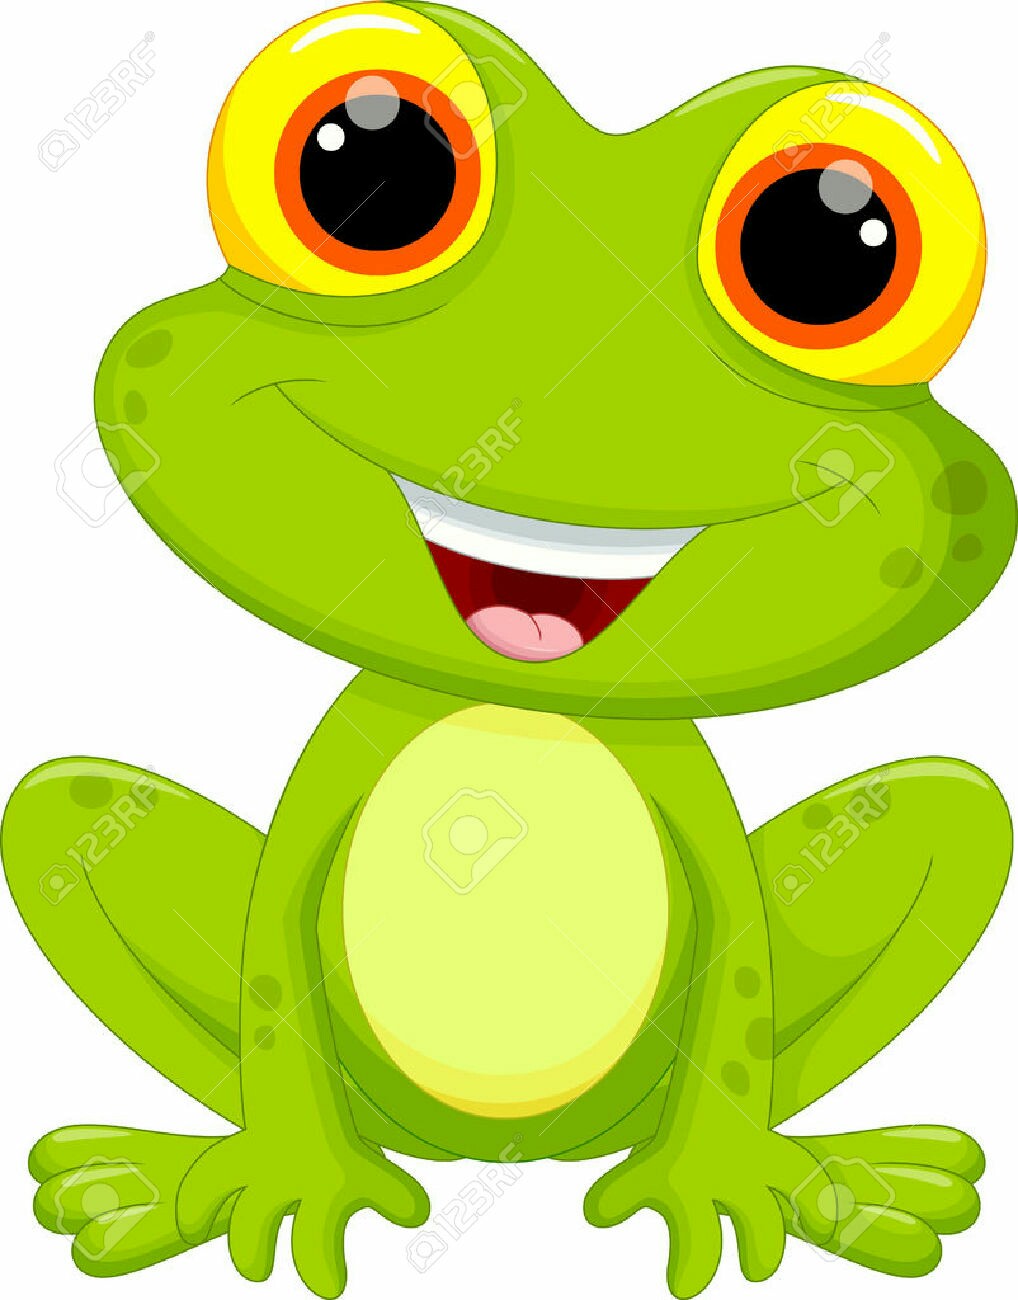 Magnificent Tree Frog svg #11, Download drawings